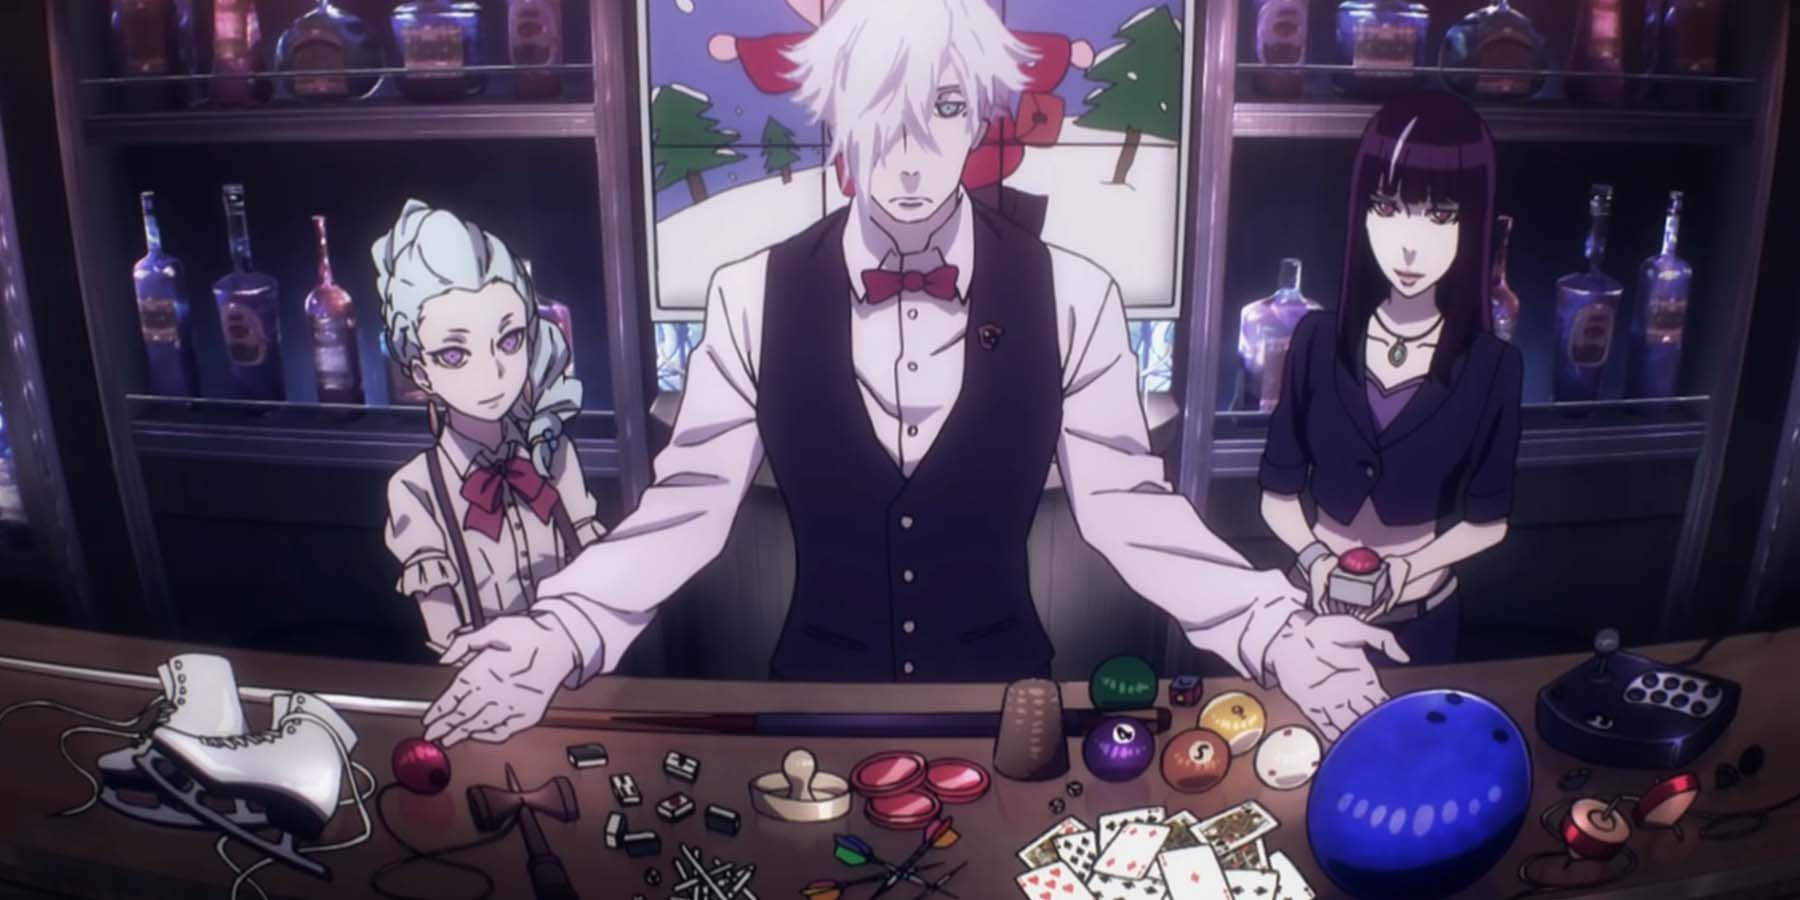 Flyers (Death Parade) opening